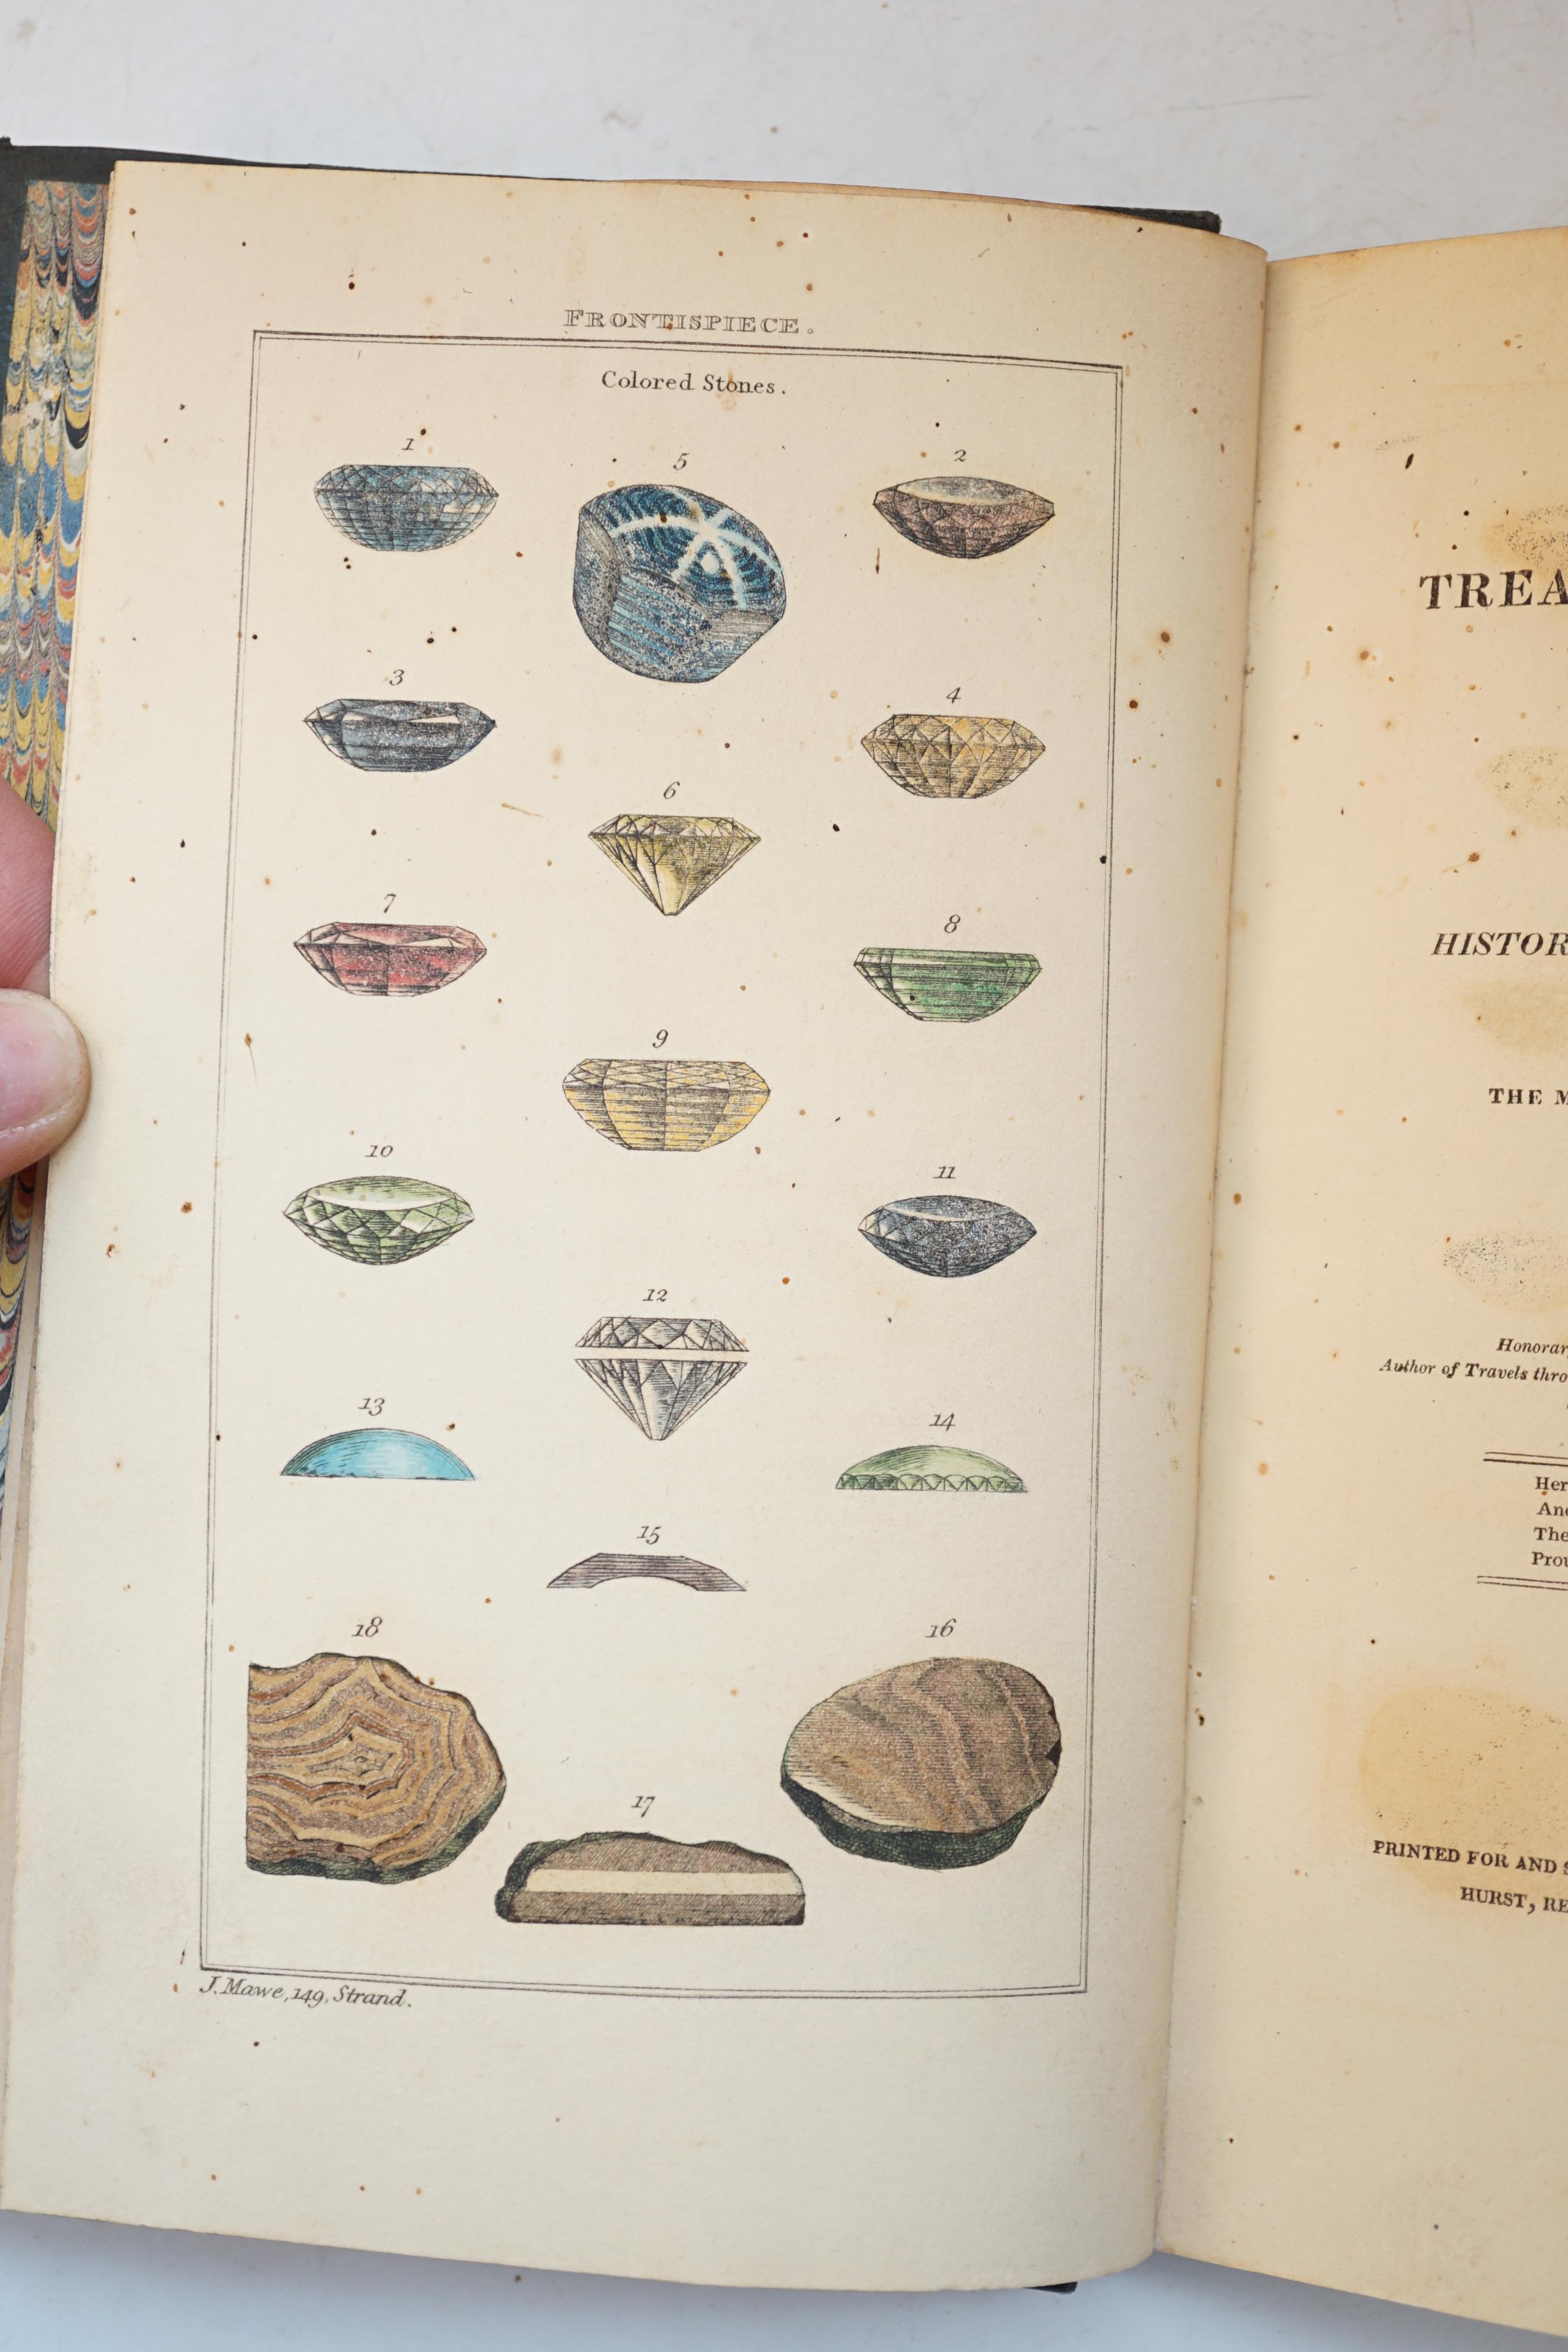 Mawe, John - A Treatise on Diamonds and Precious Stones: Including Their History, Natural and Commercial, 2nd edition, 5 engraved plates (3 hand-coloured), contemporary half calf, 8vo, for the Author, 1823